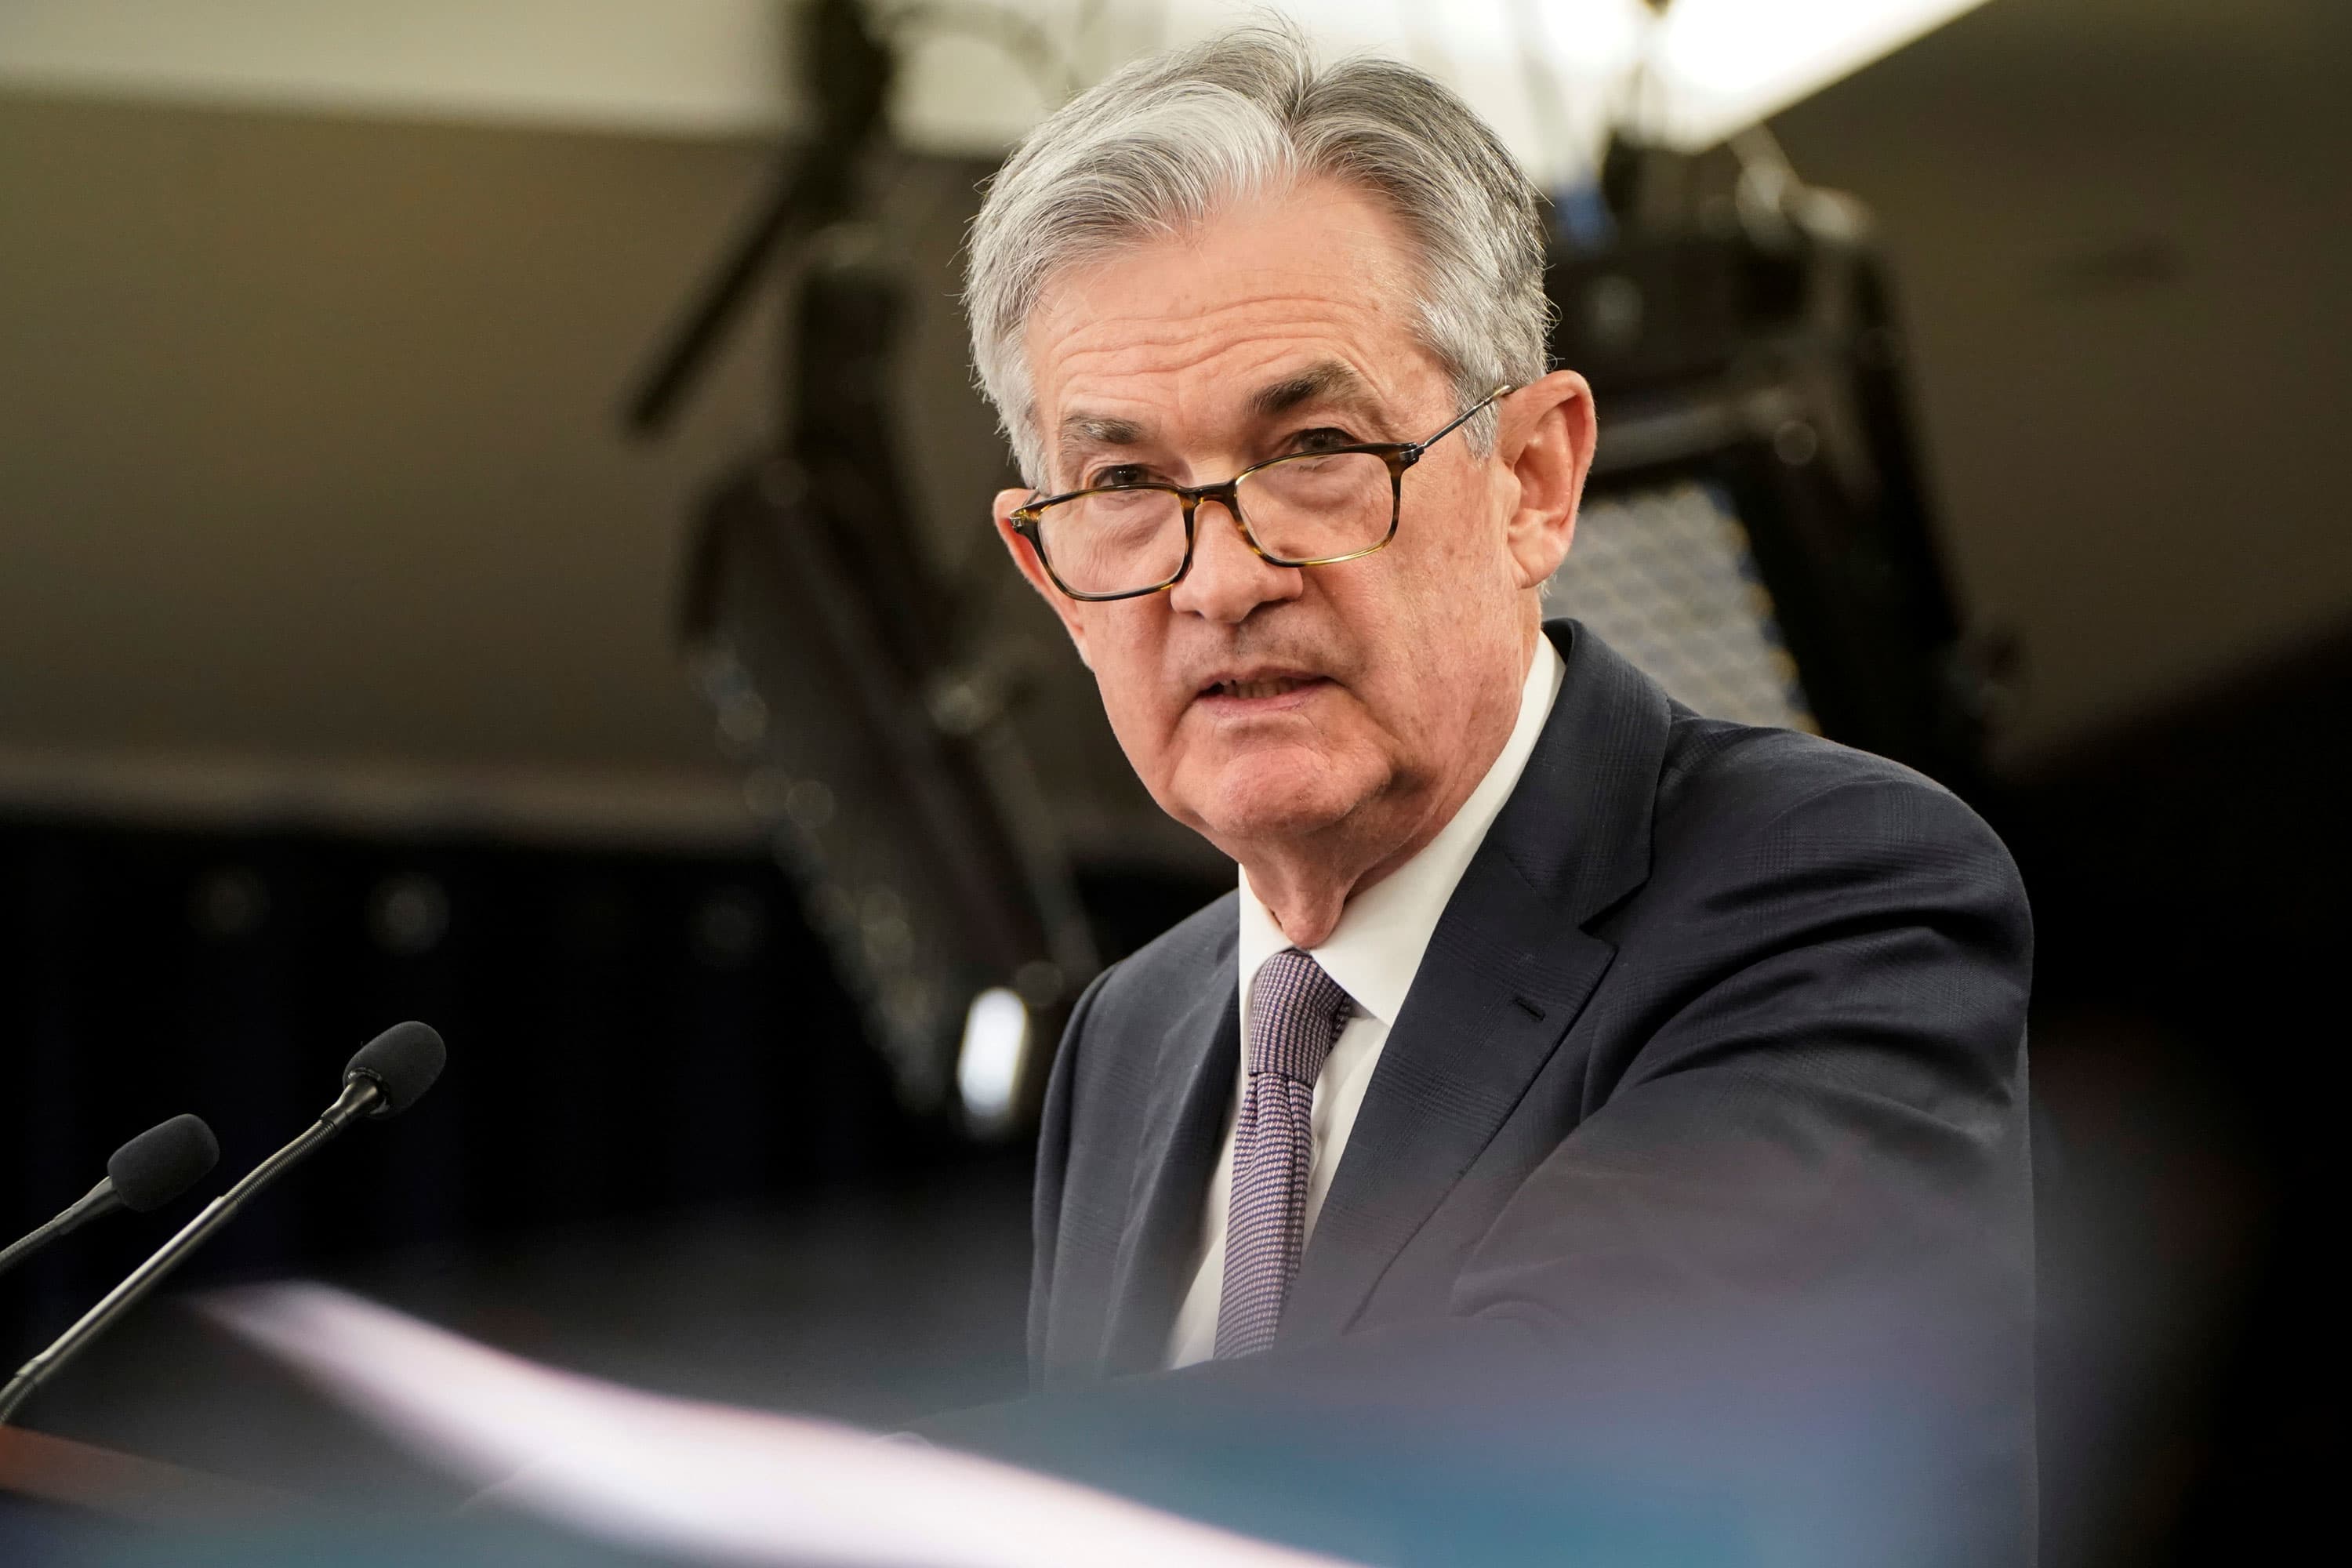 Fed is committed to using all its tools to promote recovery